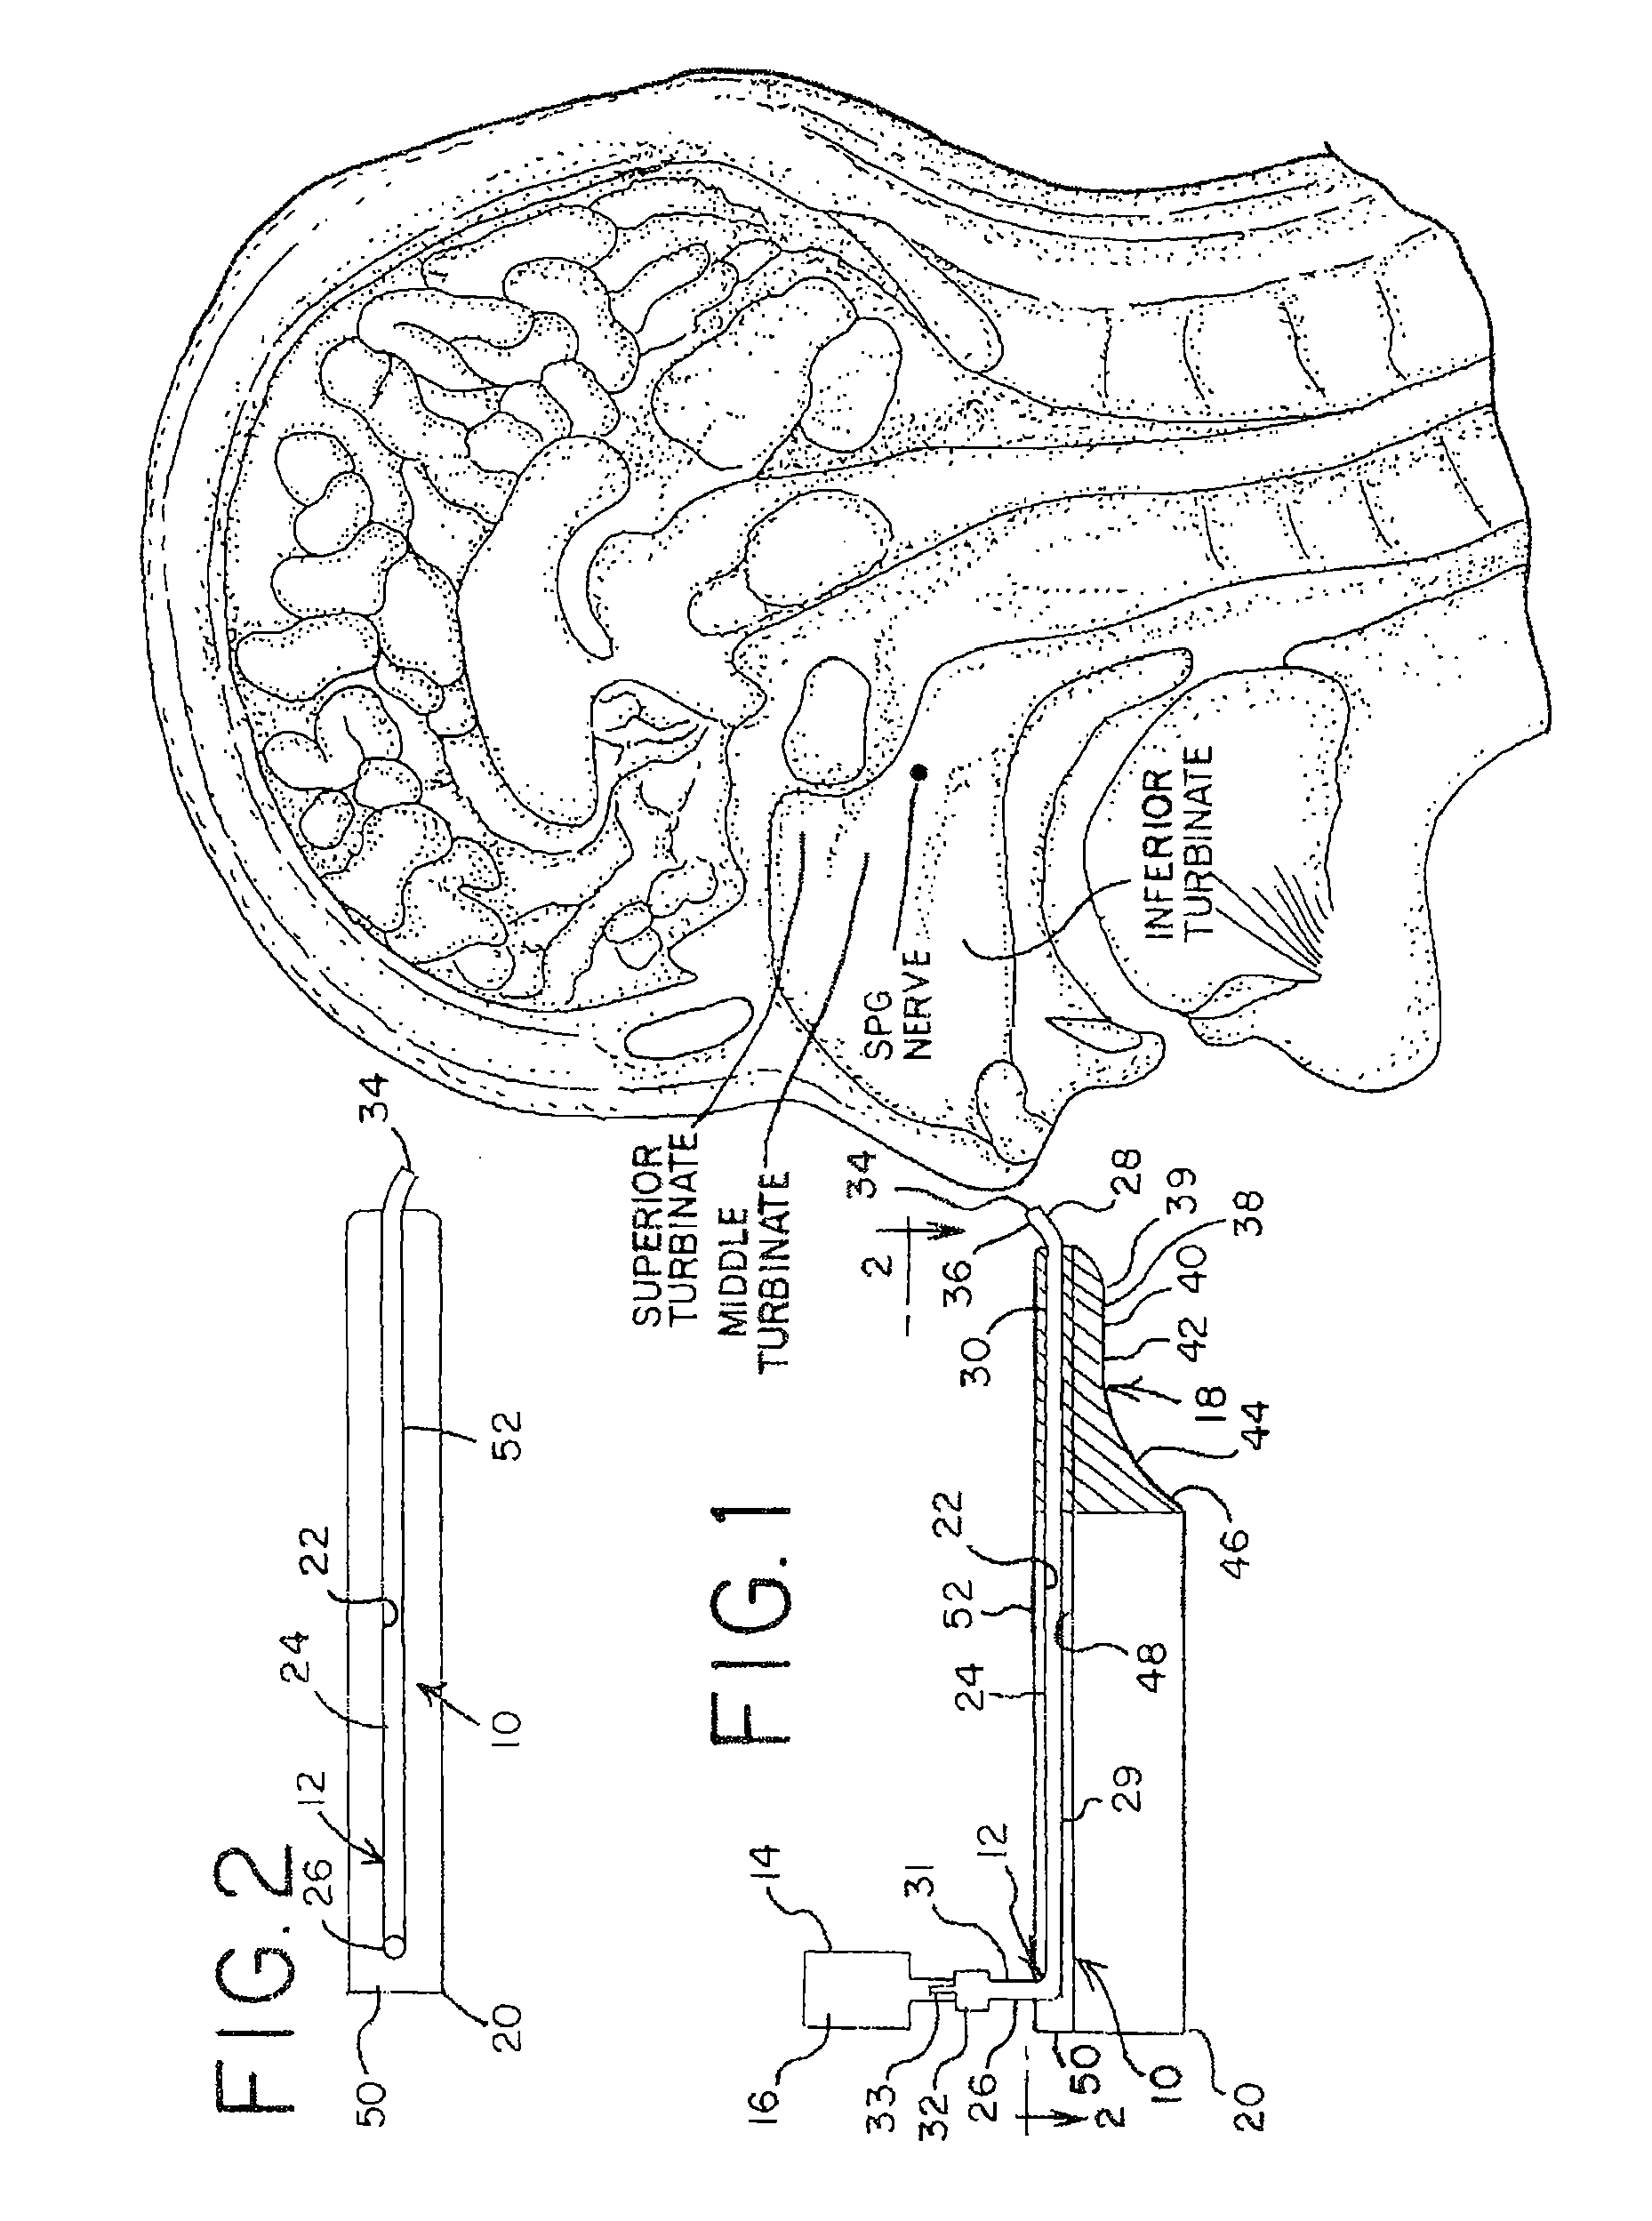 Methods for Ameliorating Pain and Devices for Delivering a Medicament